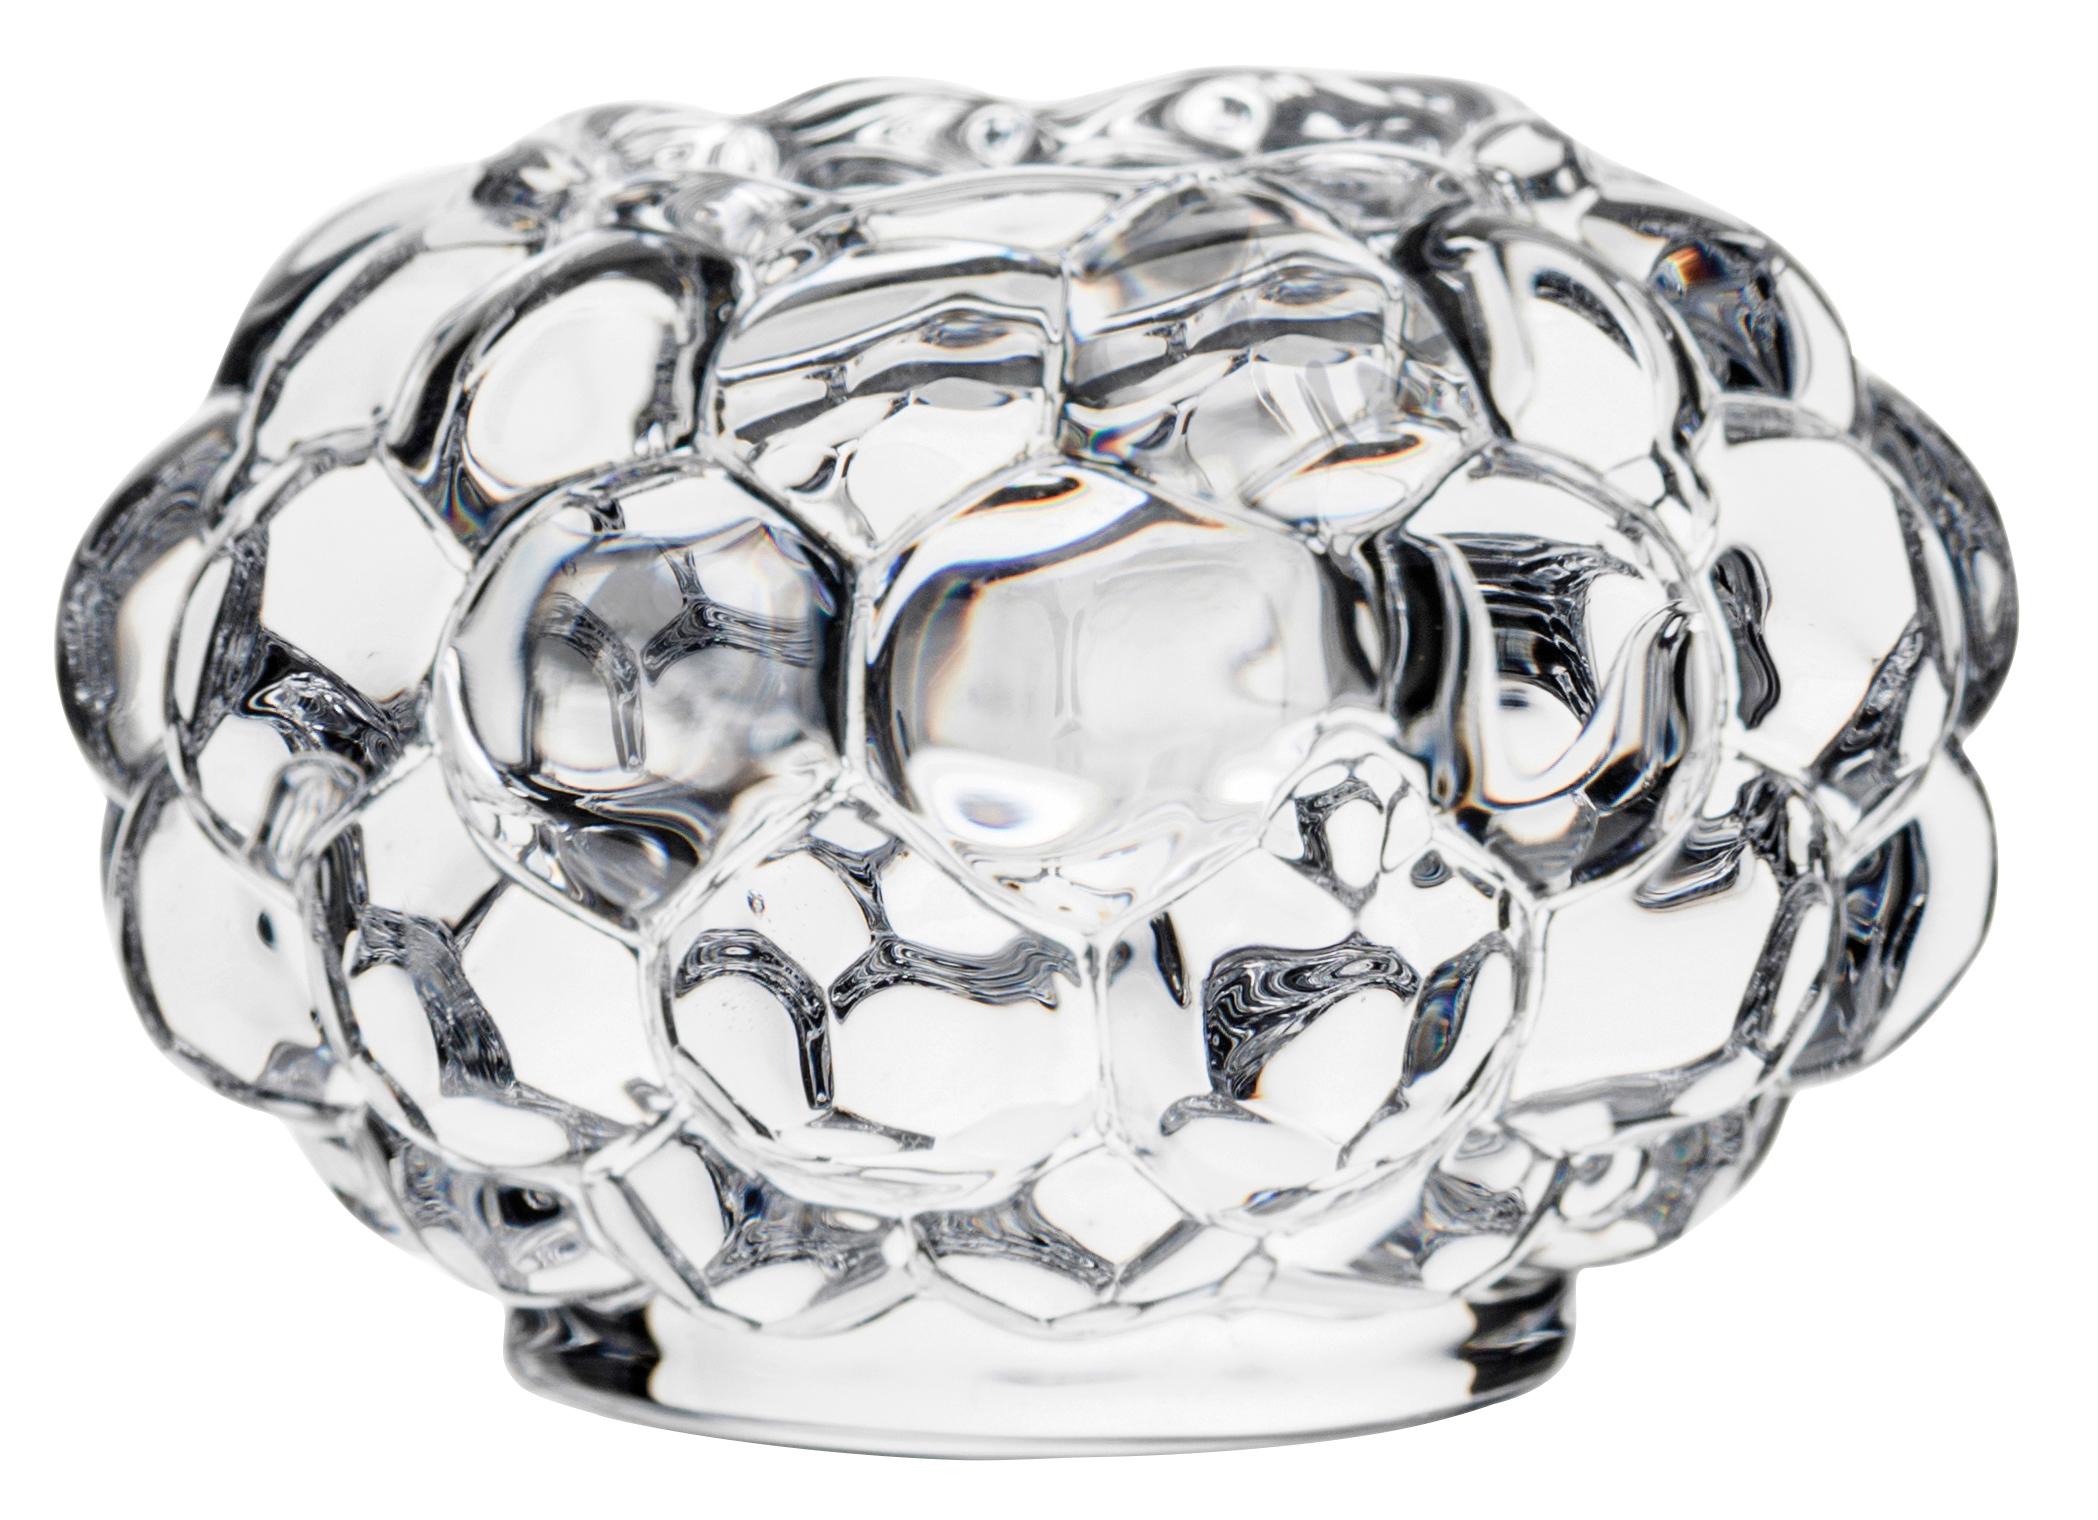 Raspberry is a beloved Orrefors classic. The small candle holder in clear crystal has a design resembling a raspberry with its round ‘drupelets’ giving it a soft look. It is a beautiful item suitable for tealight candles. Designed by Anne Nilsson.
